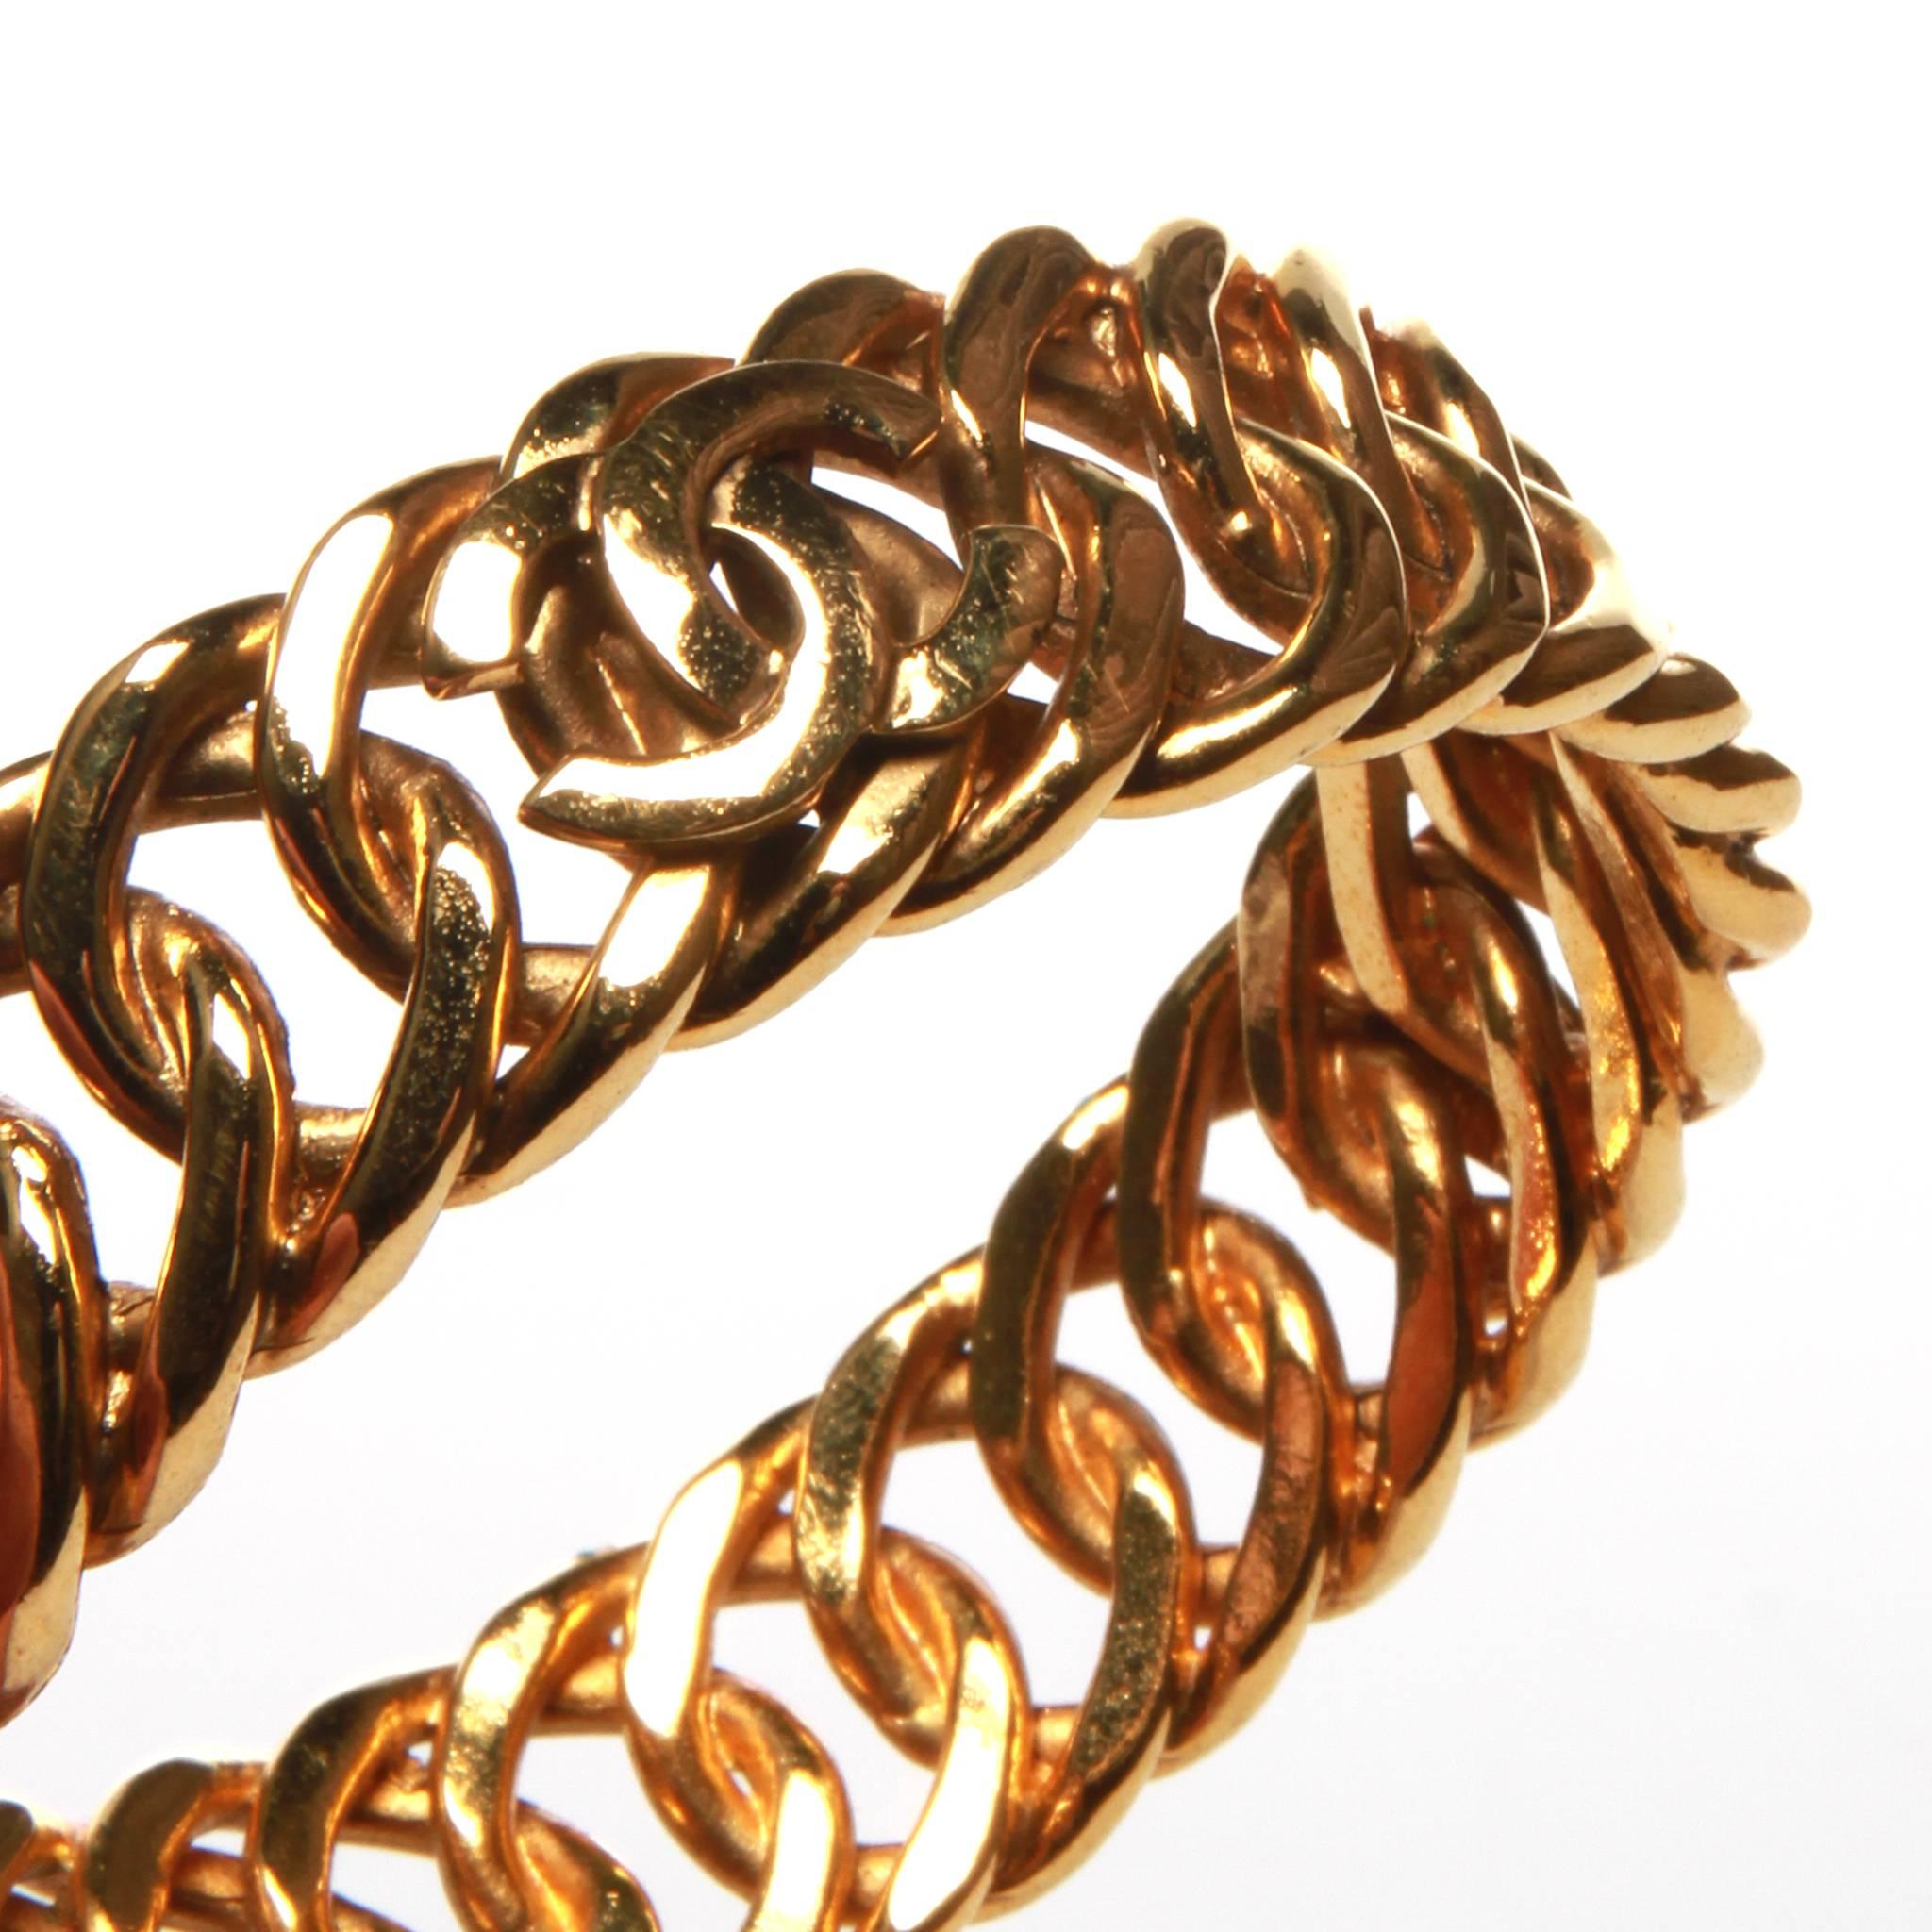 Chanel vintage bangle bracelet featuring a rigid chain design with 3 interlocking CC accents. 

